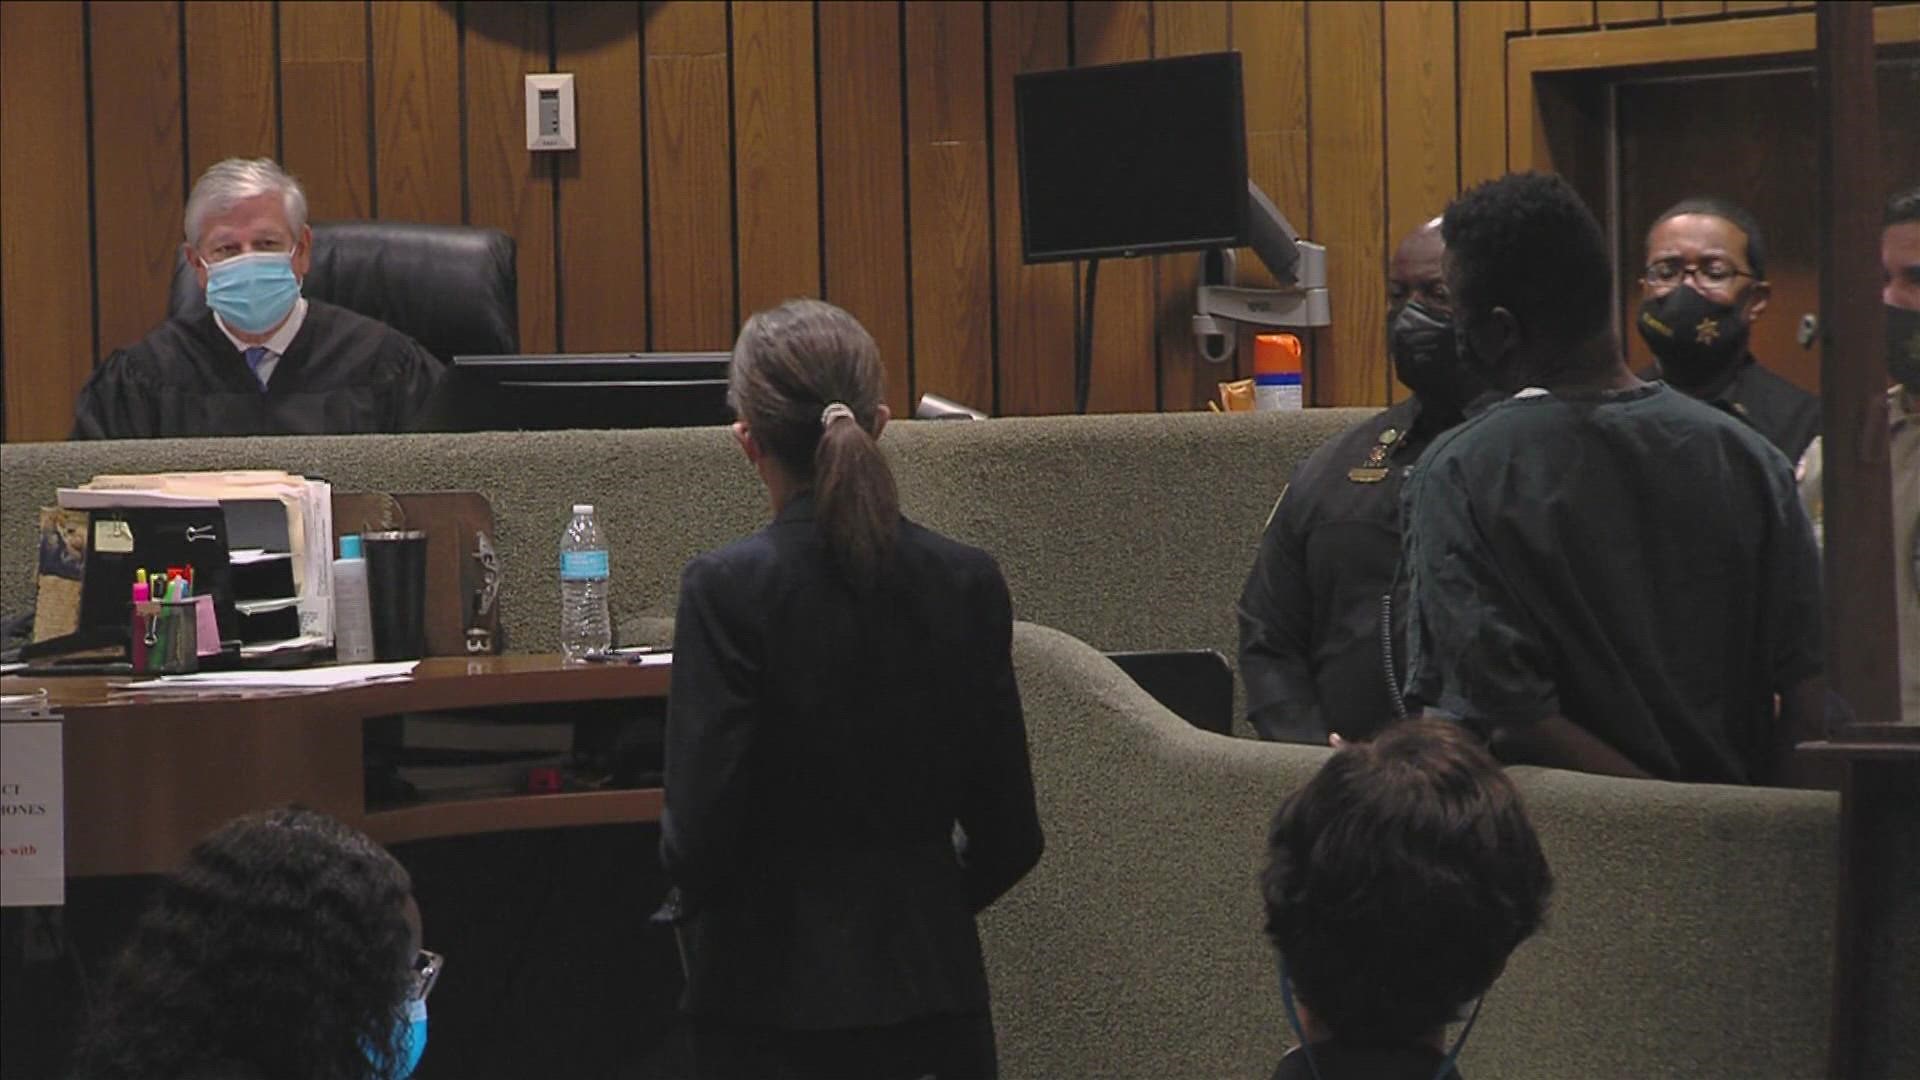 The judge revoked a previous bond of $510,000, and Cleotha Henderson (aka Abston) is now being held without bond.